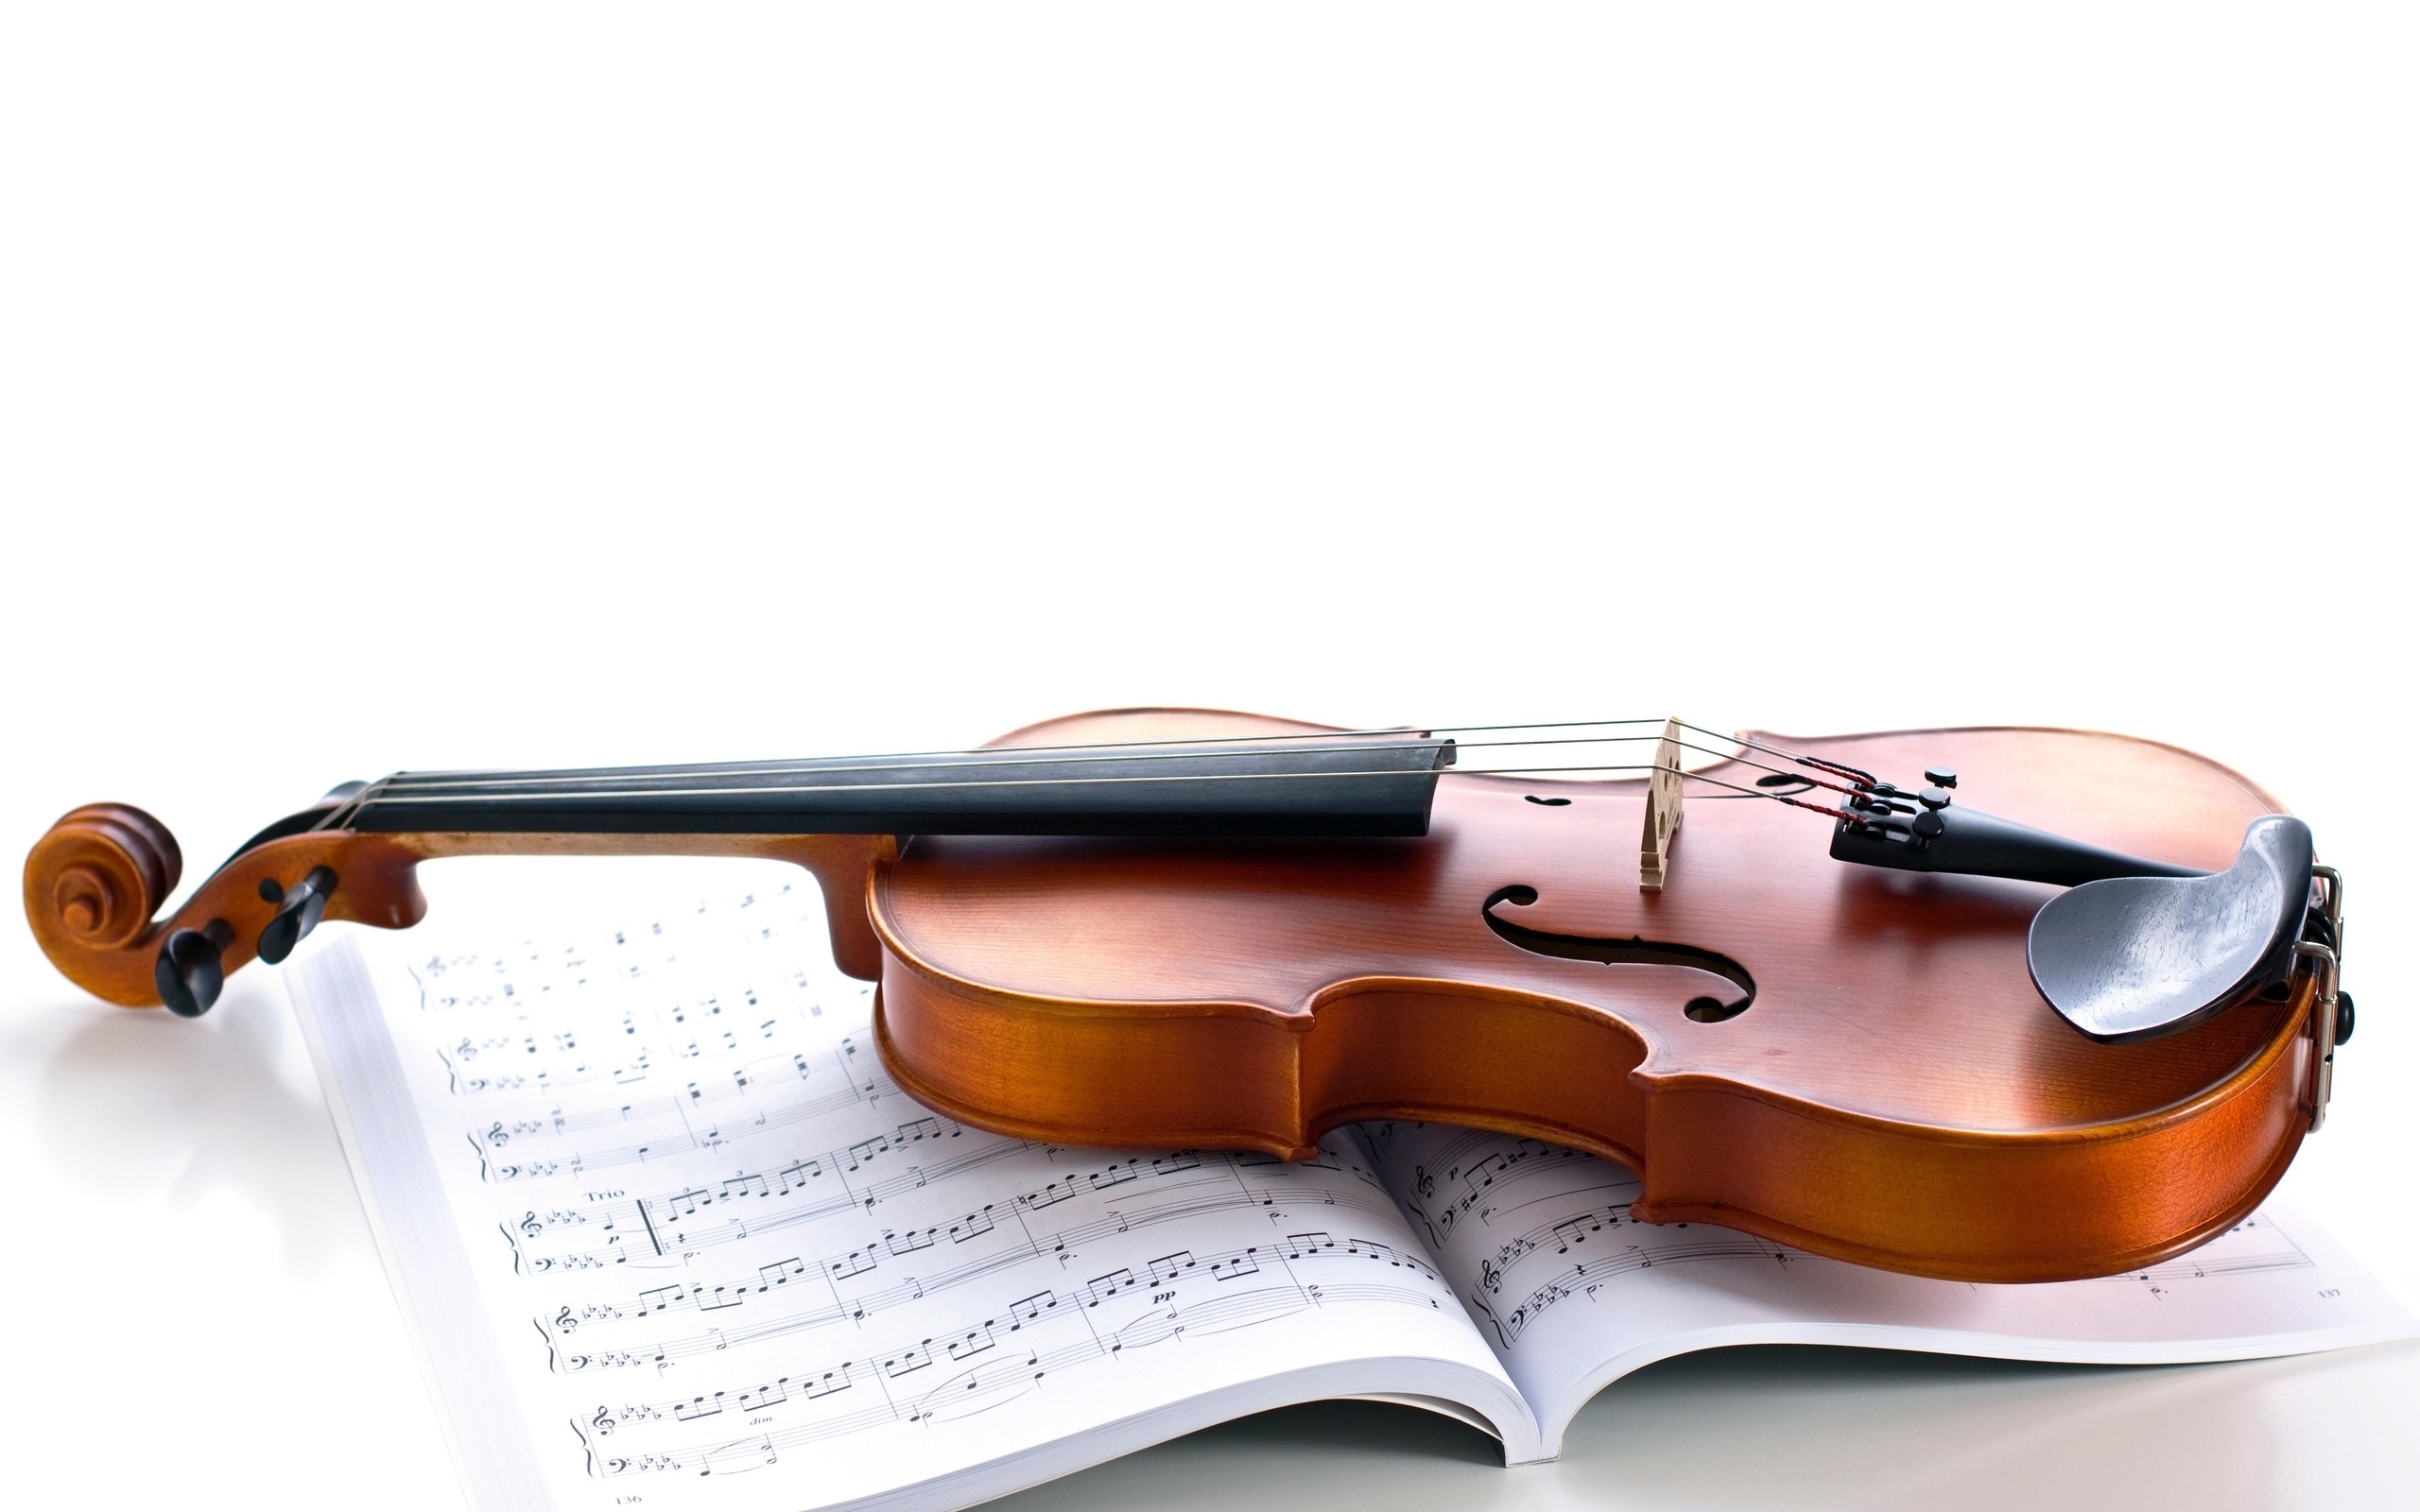 Violin: Classical Music, String Instrument, Fine Carved Wooden Plates, Notes. 2560x1600 HD Background.